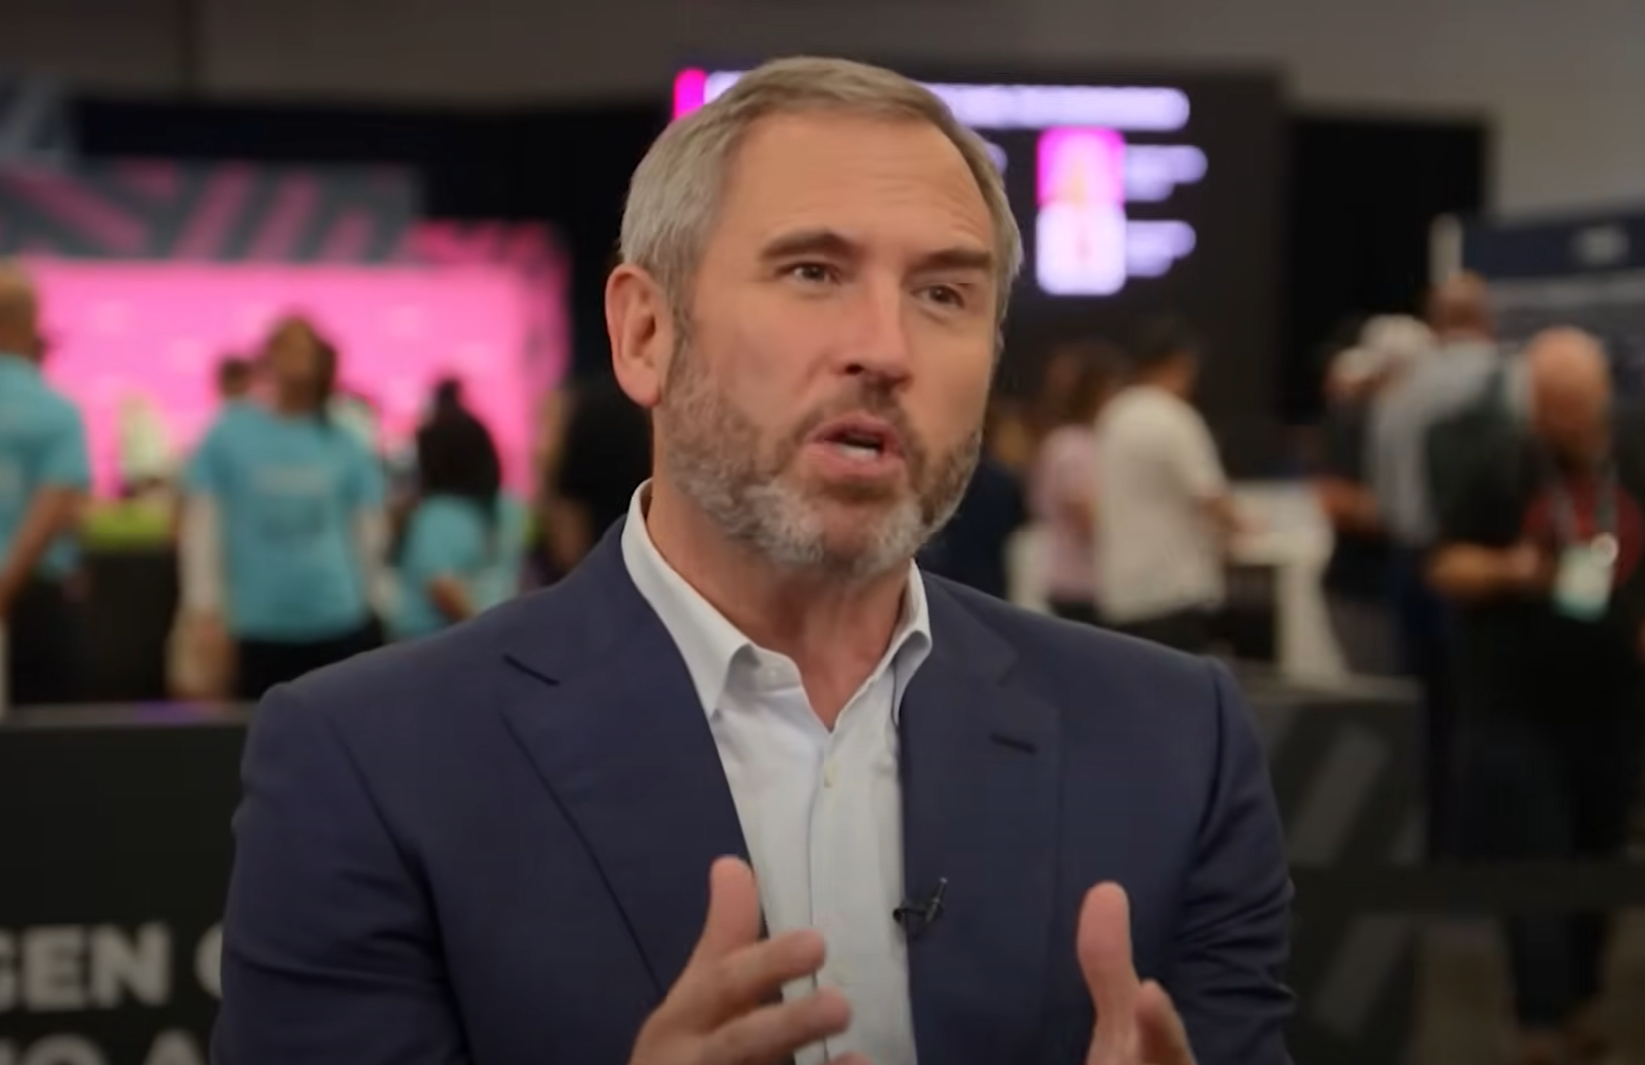 Ripple’s CEO, Brad Garlinghouse, has unveiled a significant leap forward in the world of blockchain and digital currency by announcing partnerships with 10 governments to develop Central Bank Digital Currencies (CBDCs). These collaborations aim to harness Ripple’s blockchain technology for the creation and management of government-issued digital currencies, signaling a noteworthy advance in the integration